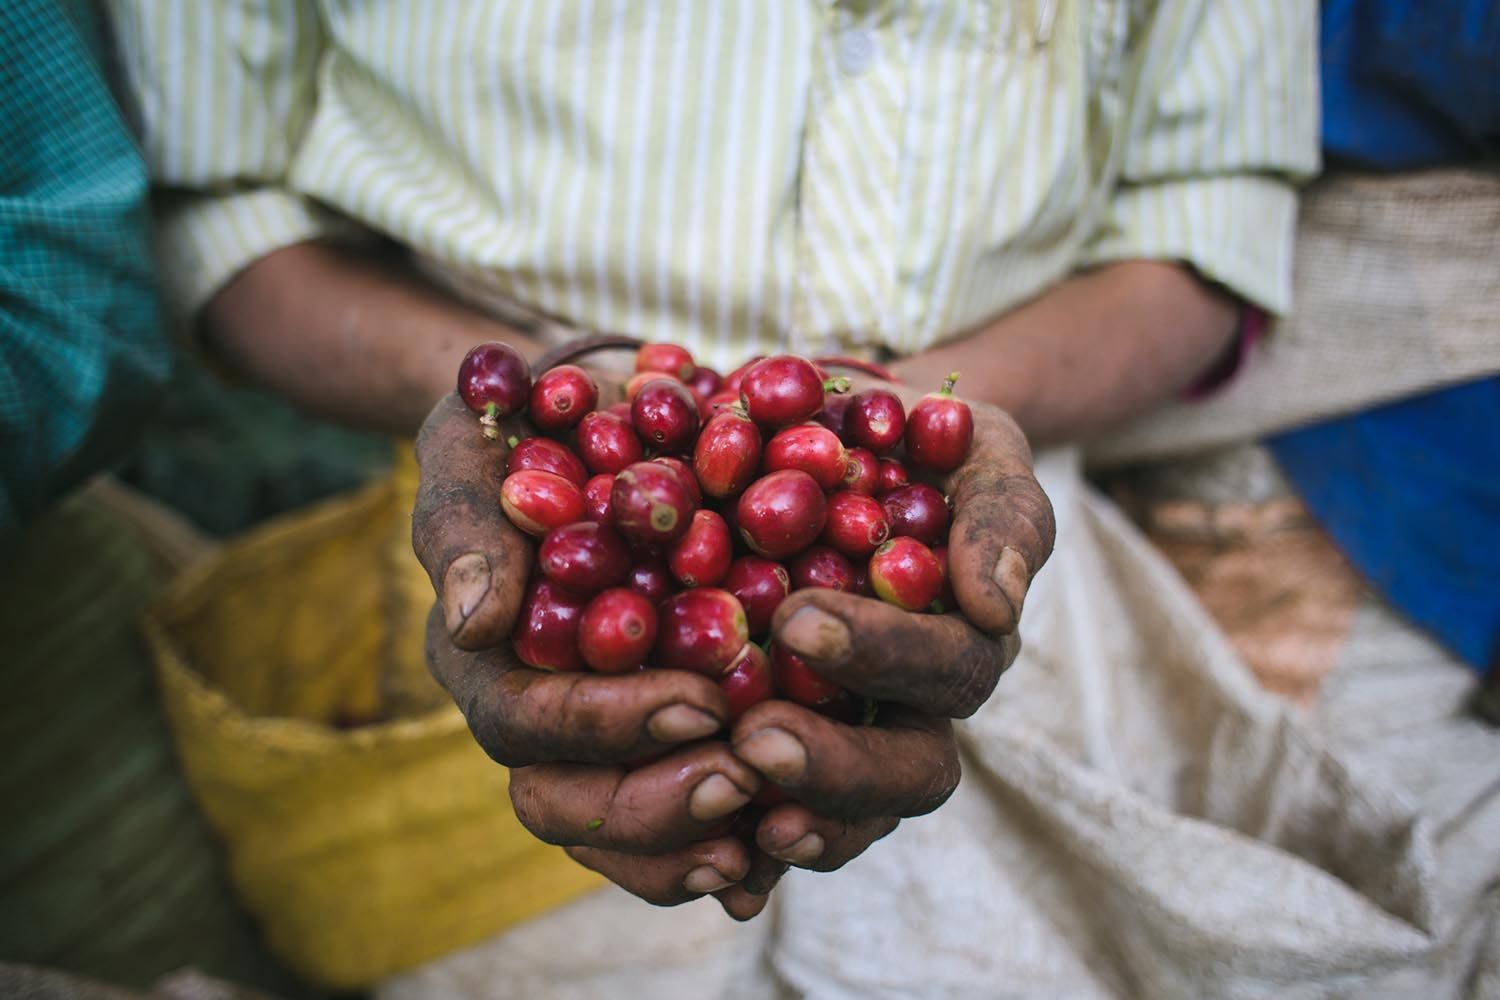 The Process Behind Building A Global Specialty Coffee And Craft Bakes Brand Out Of South Asia